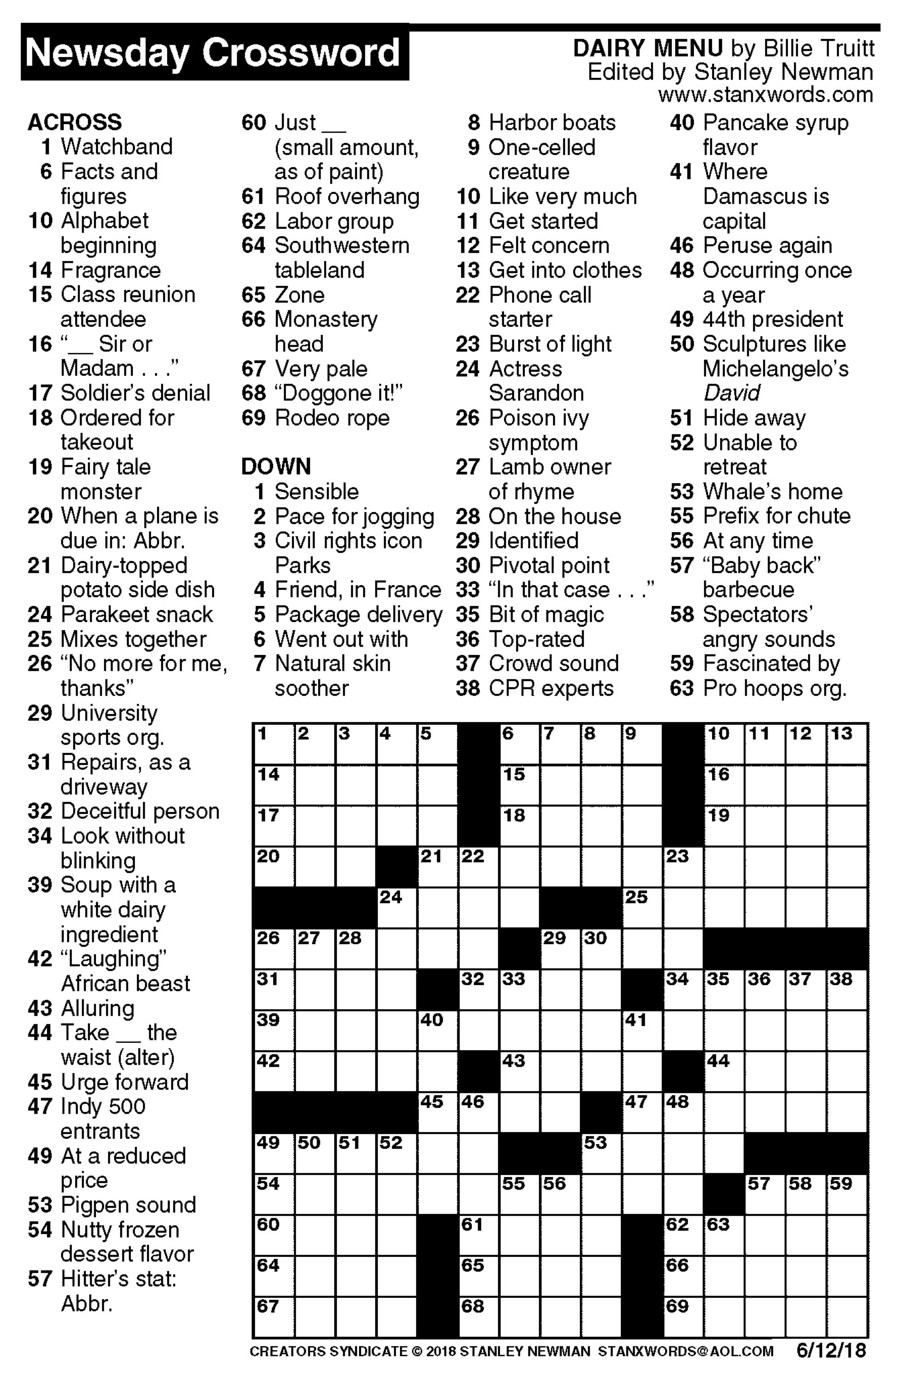 Newsday Crossword Puzzle For Jun 12, 2018,stanley Newman - Printable Crossword Puzzles Newsday